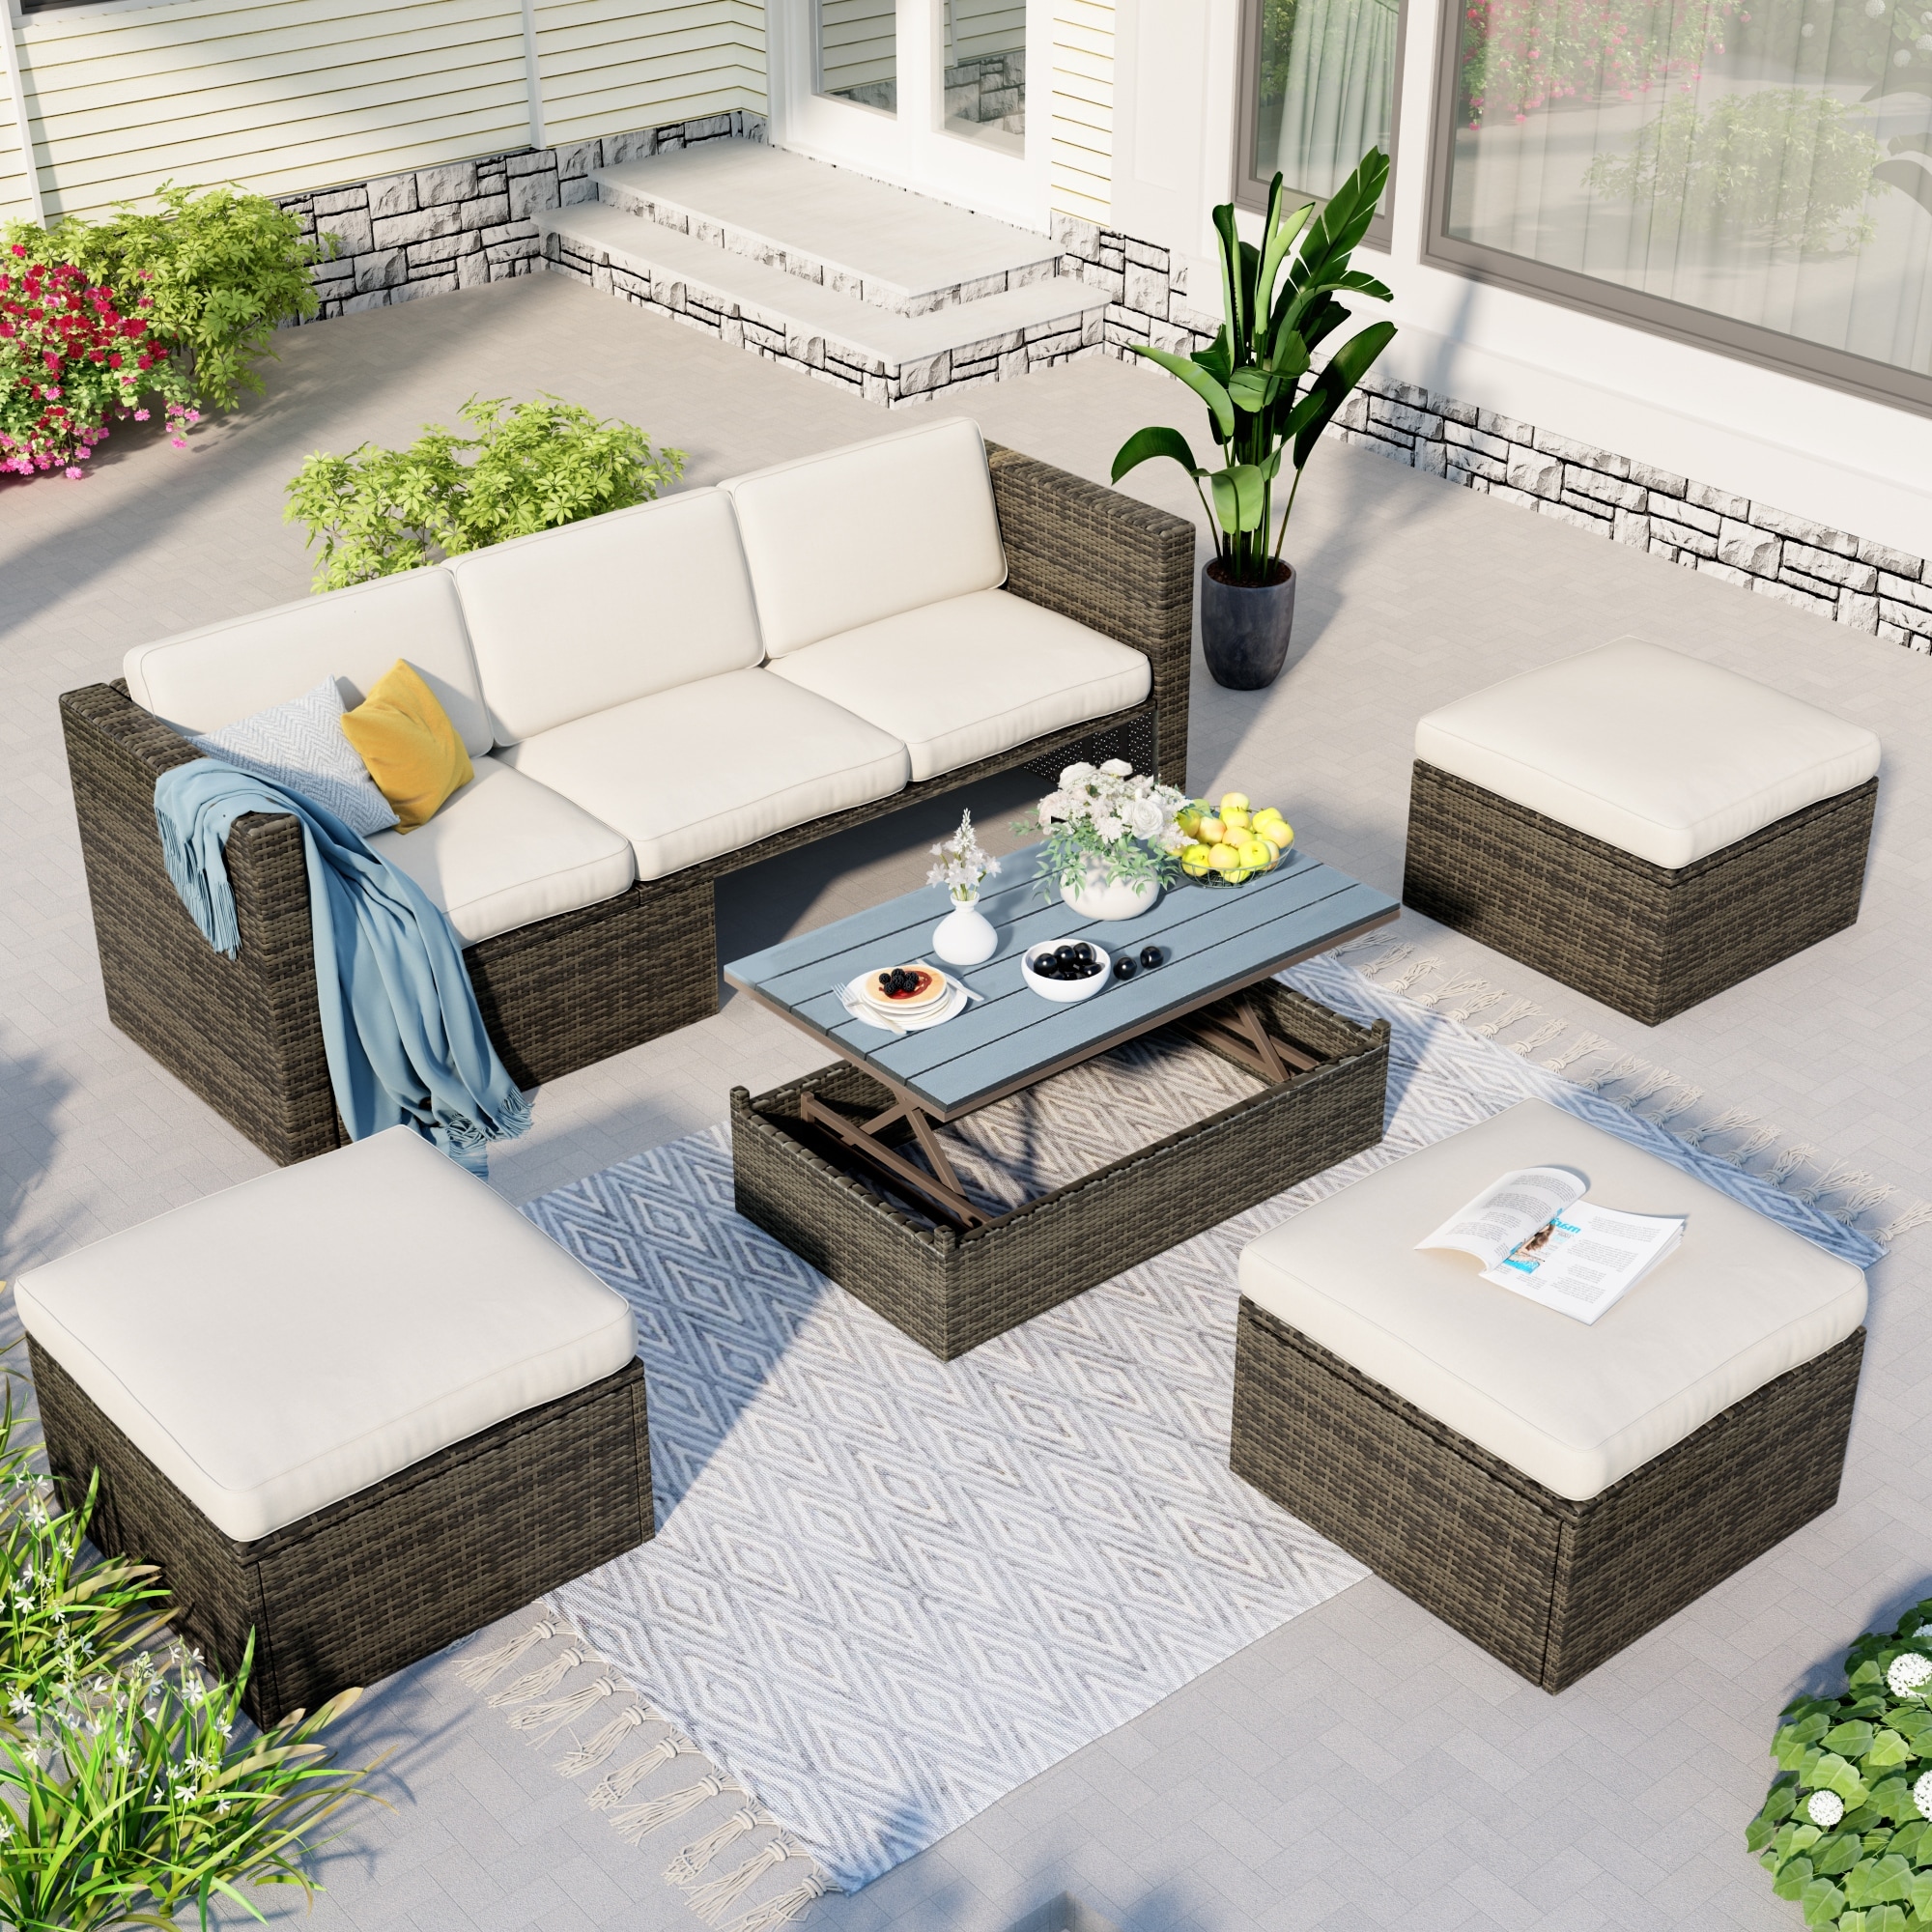 5-piece Patio Wicker Sofa Modern Patio Furniture Sets With Adustable Backrest  Cushions And Ottomans and Lift Top Coffee Table